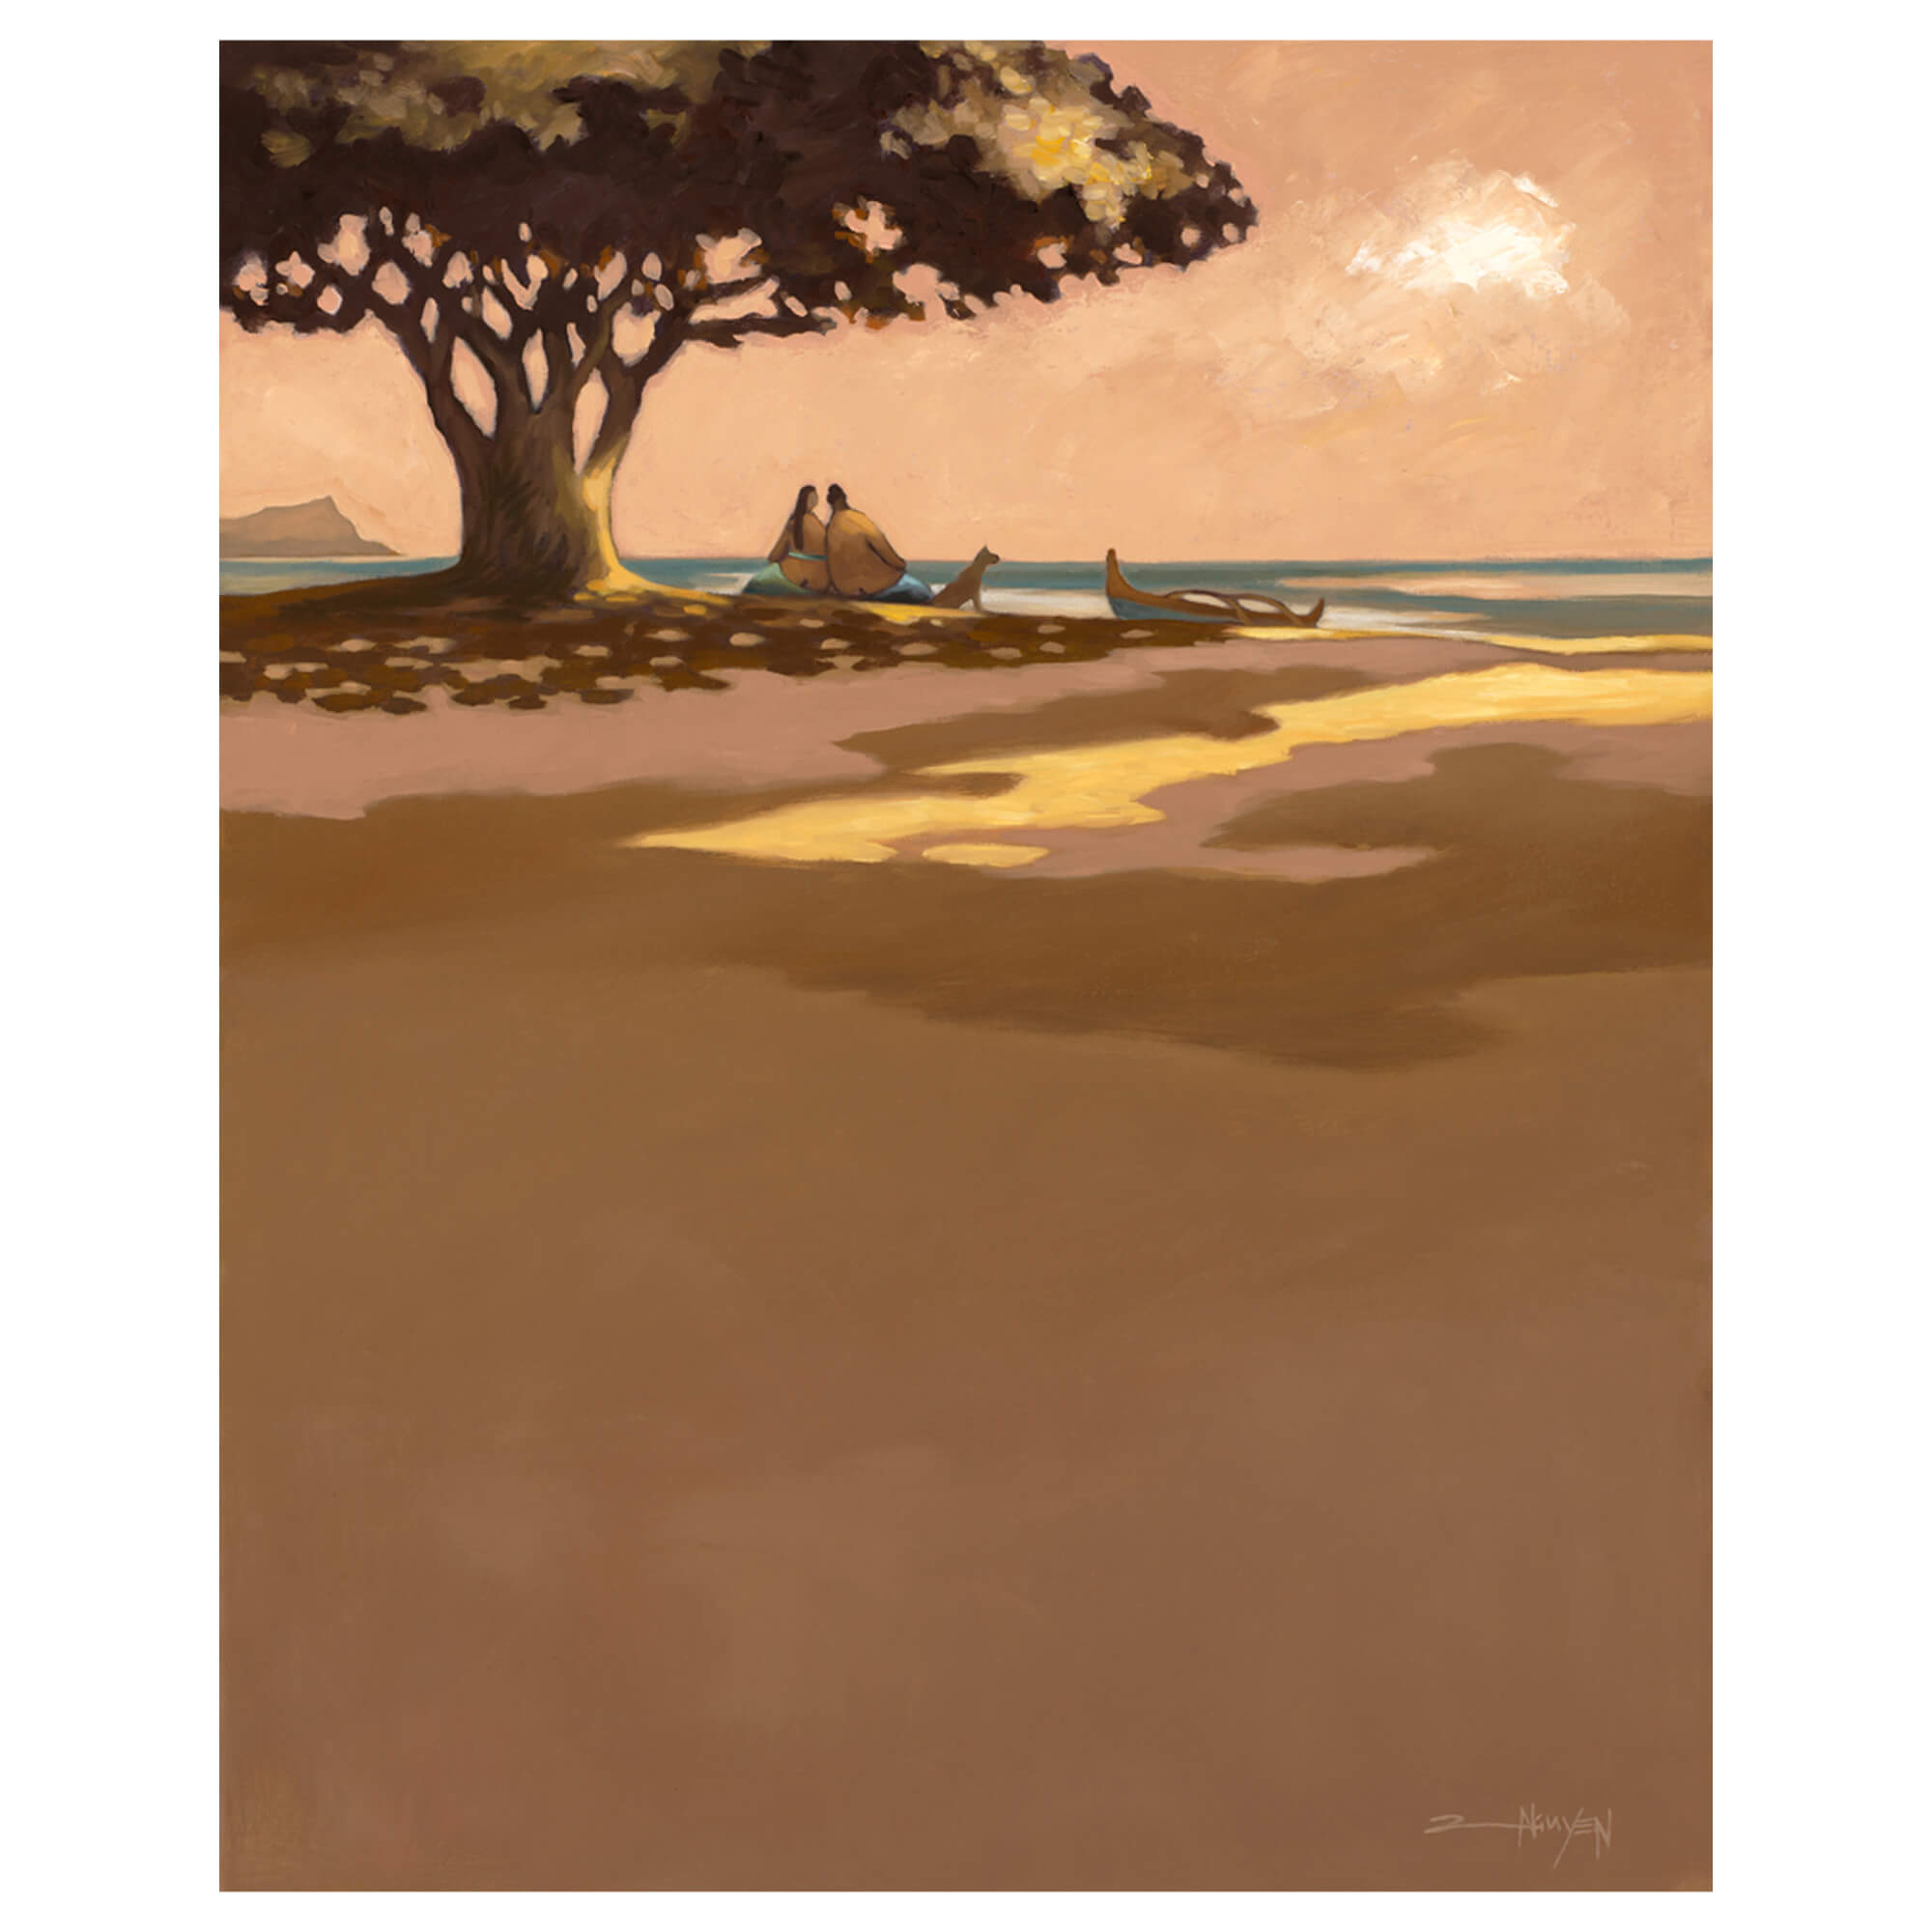 A matted art print of a couple and their dog enjoying a peaceful sunset by Hawaii artist Tim Nguyen